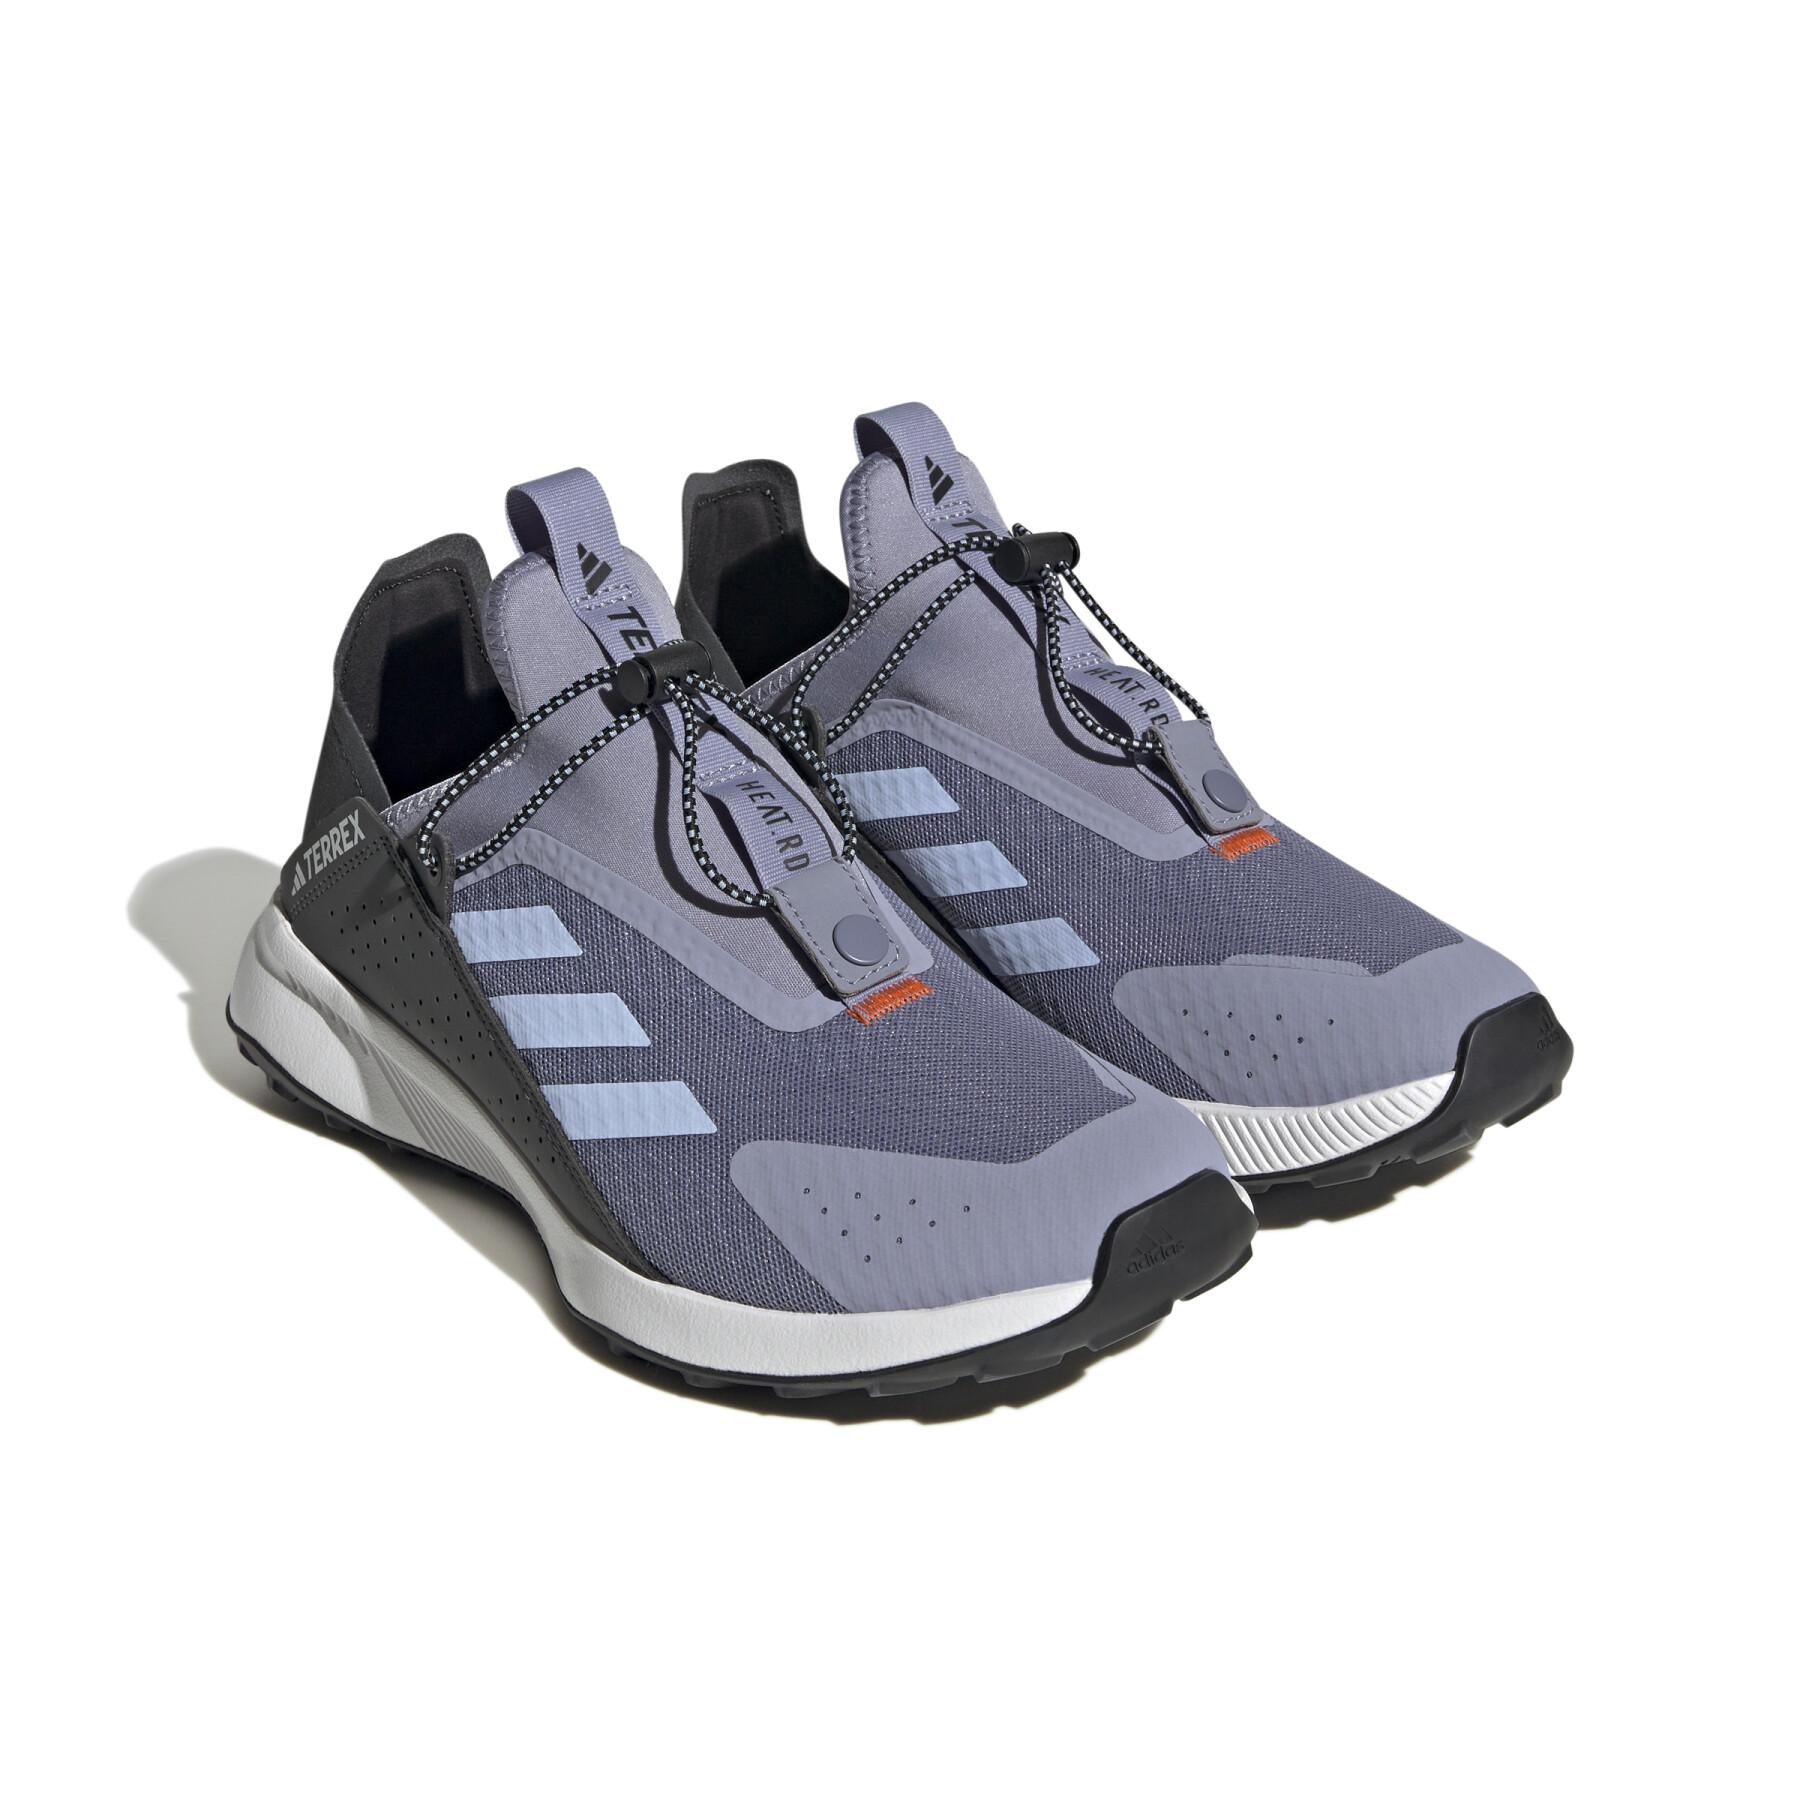 Hiking shoes adidas Terrex Voyager 21 Heat.RDY Travel